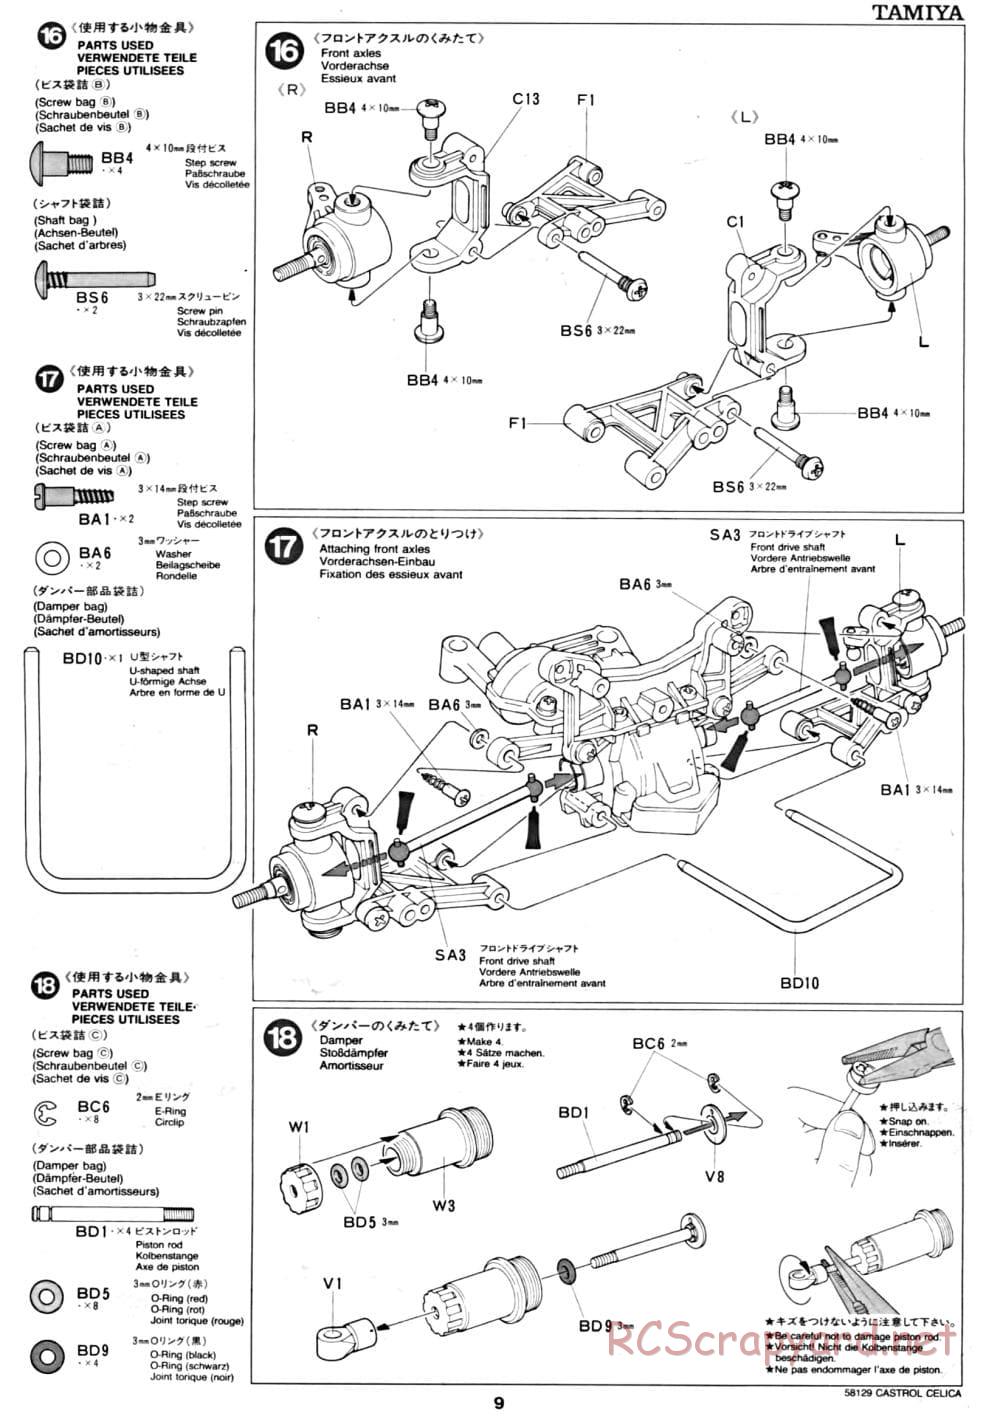 Tamiya - Castrol Celica 93 Monte-Carlo - TA-02 Chassis - Manual - Page 9